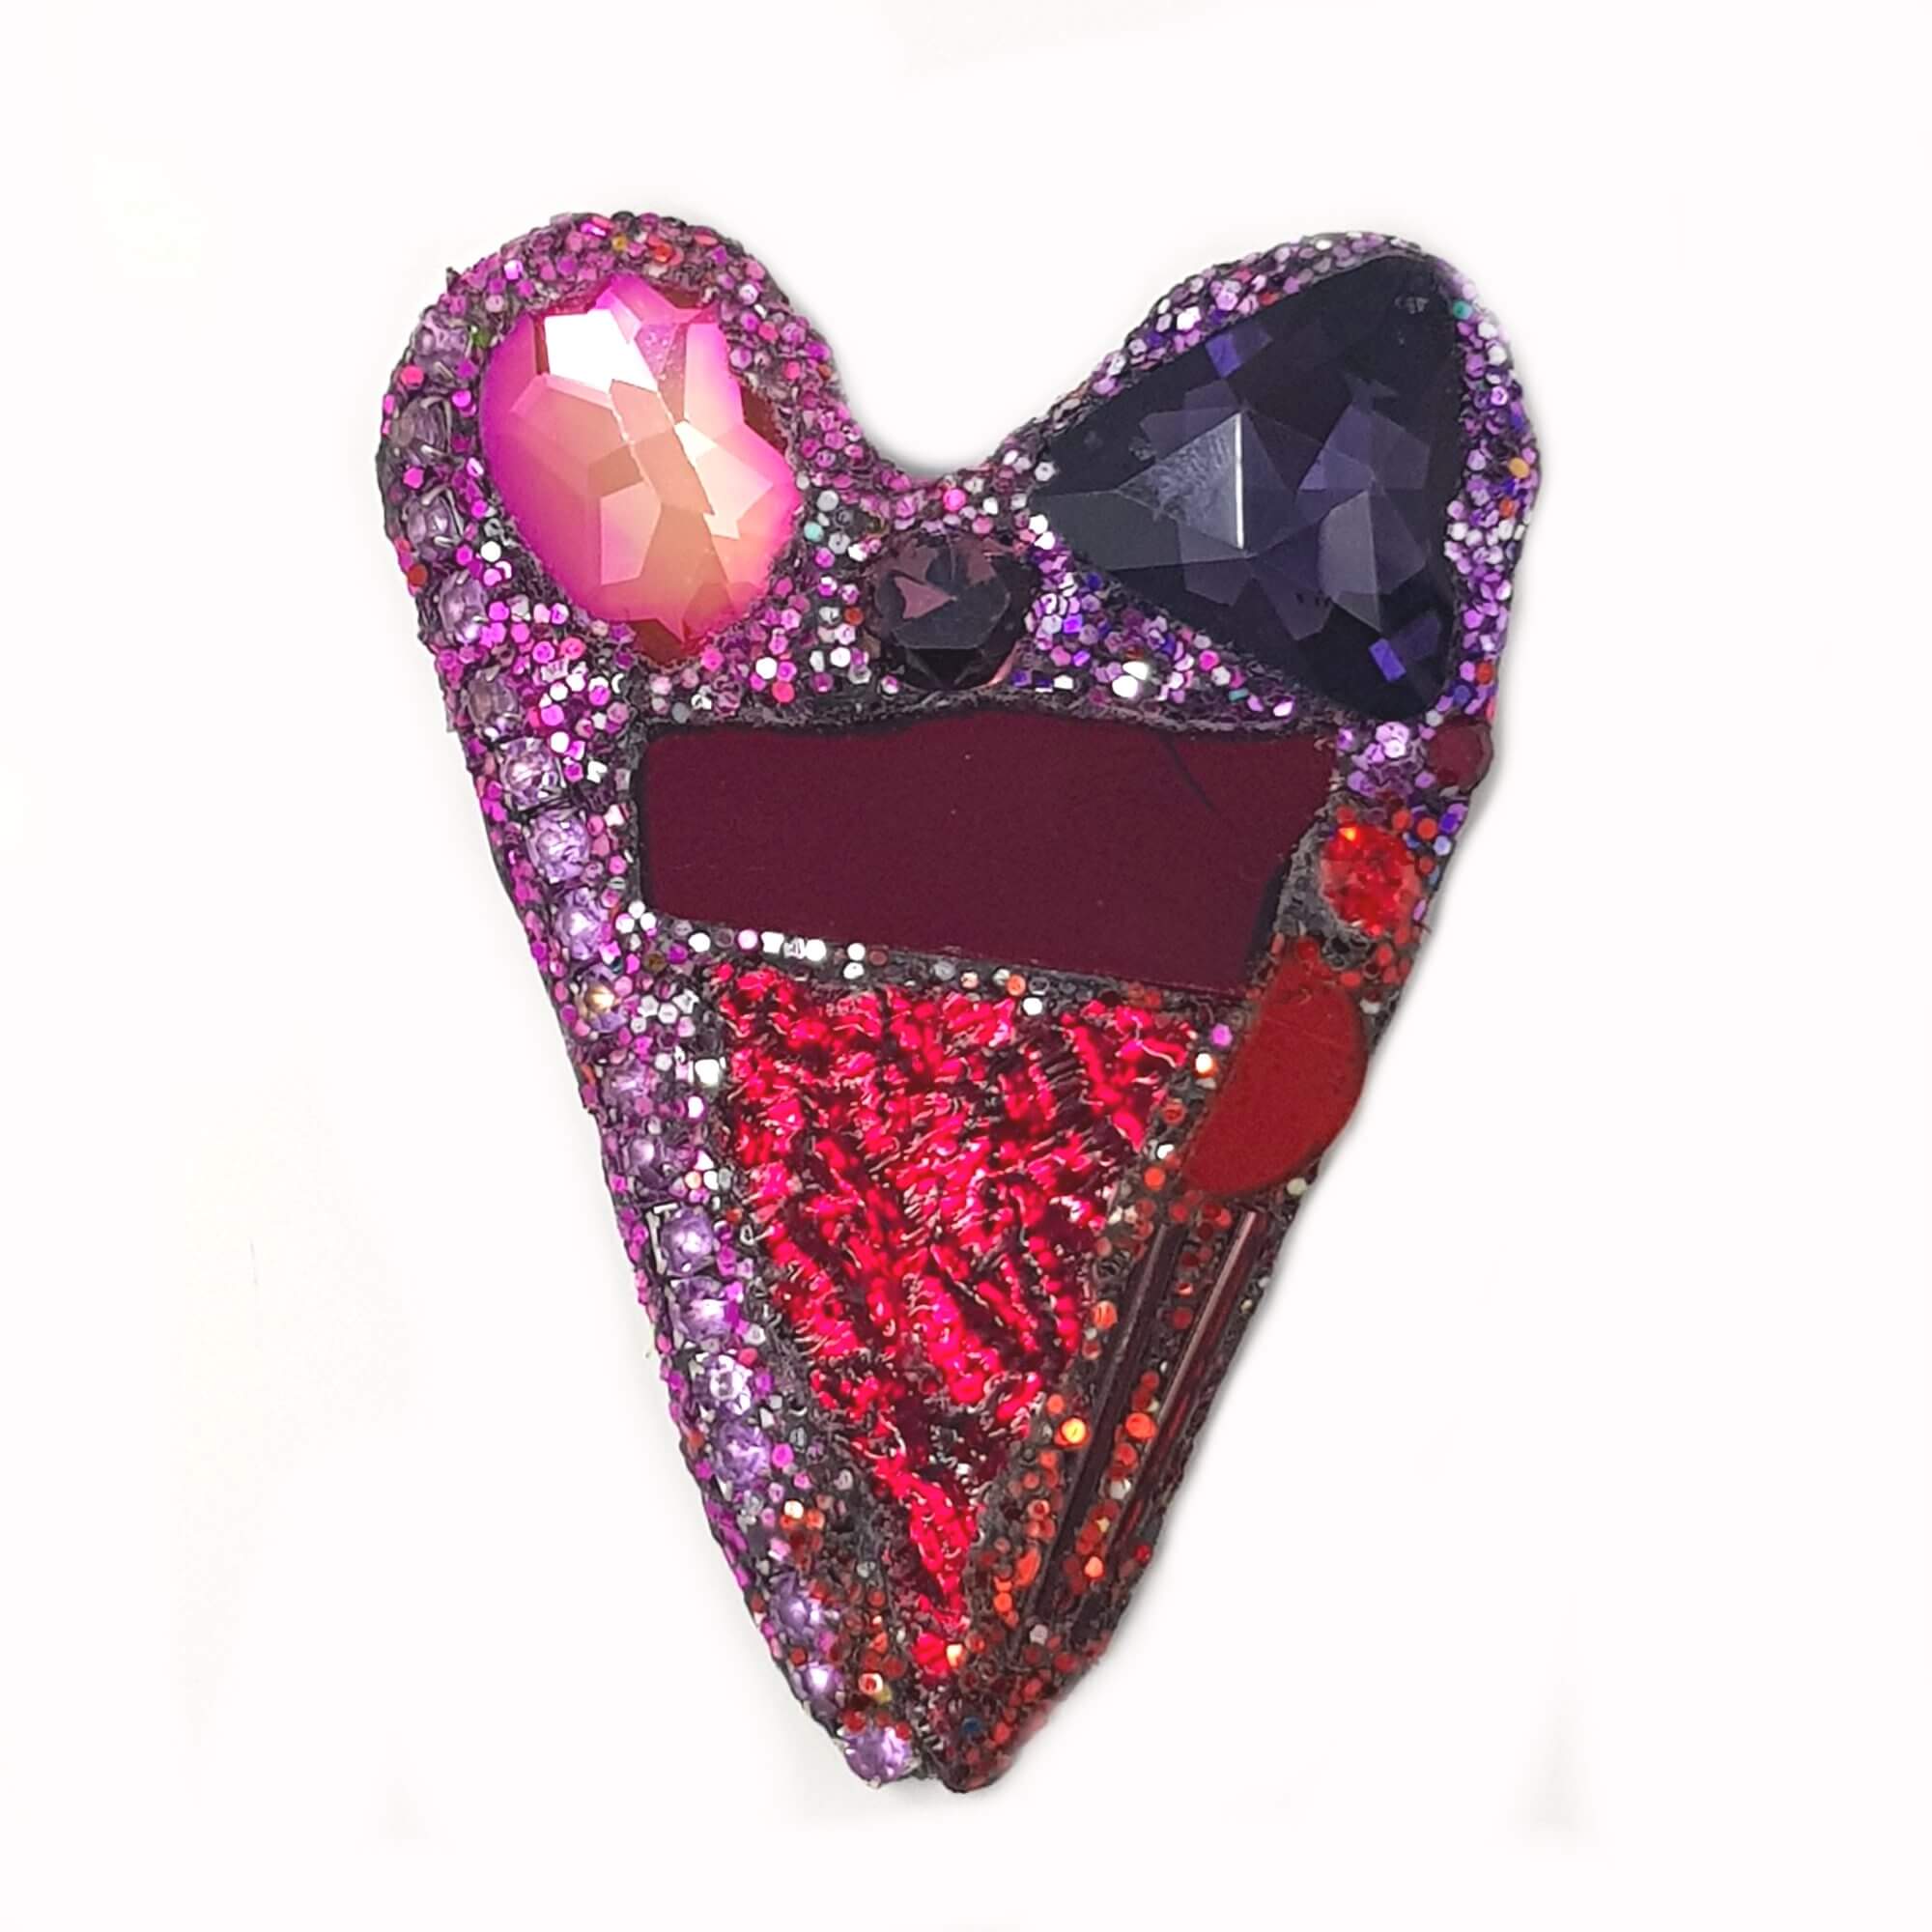 RED, PINK AND PURPLE HEART BROOCH